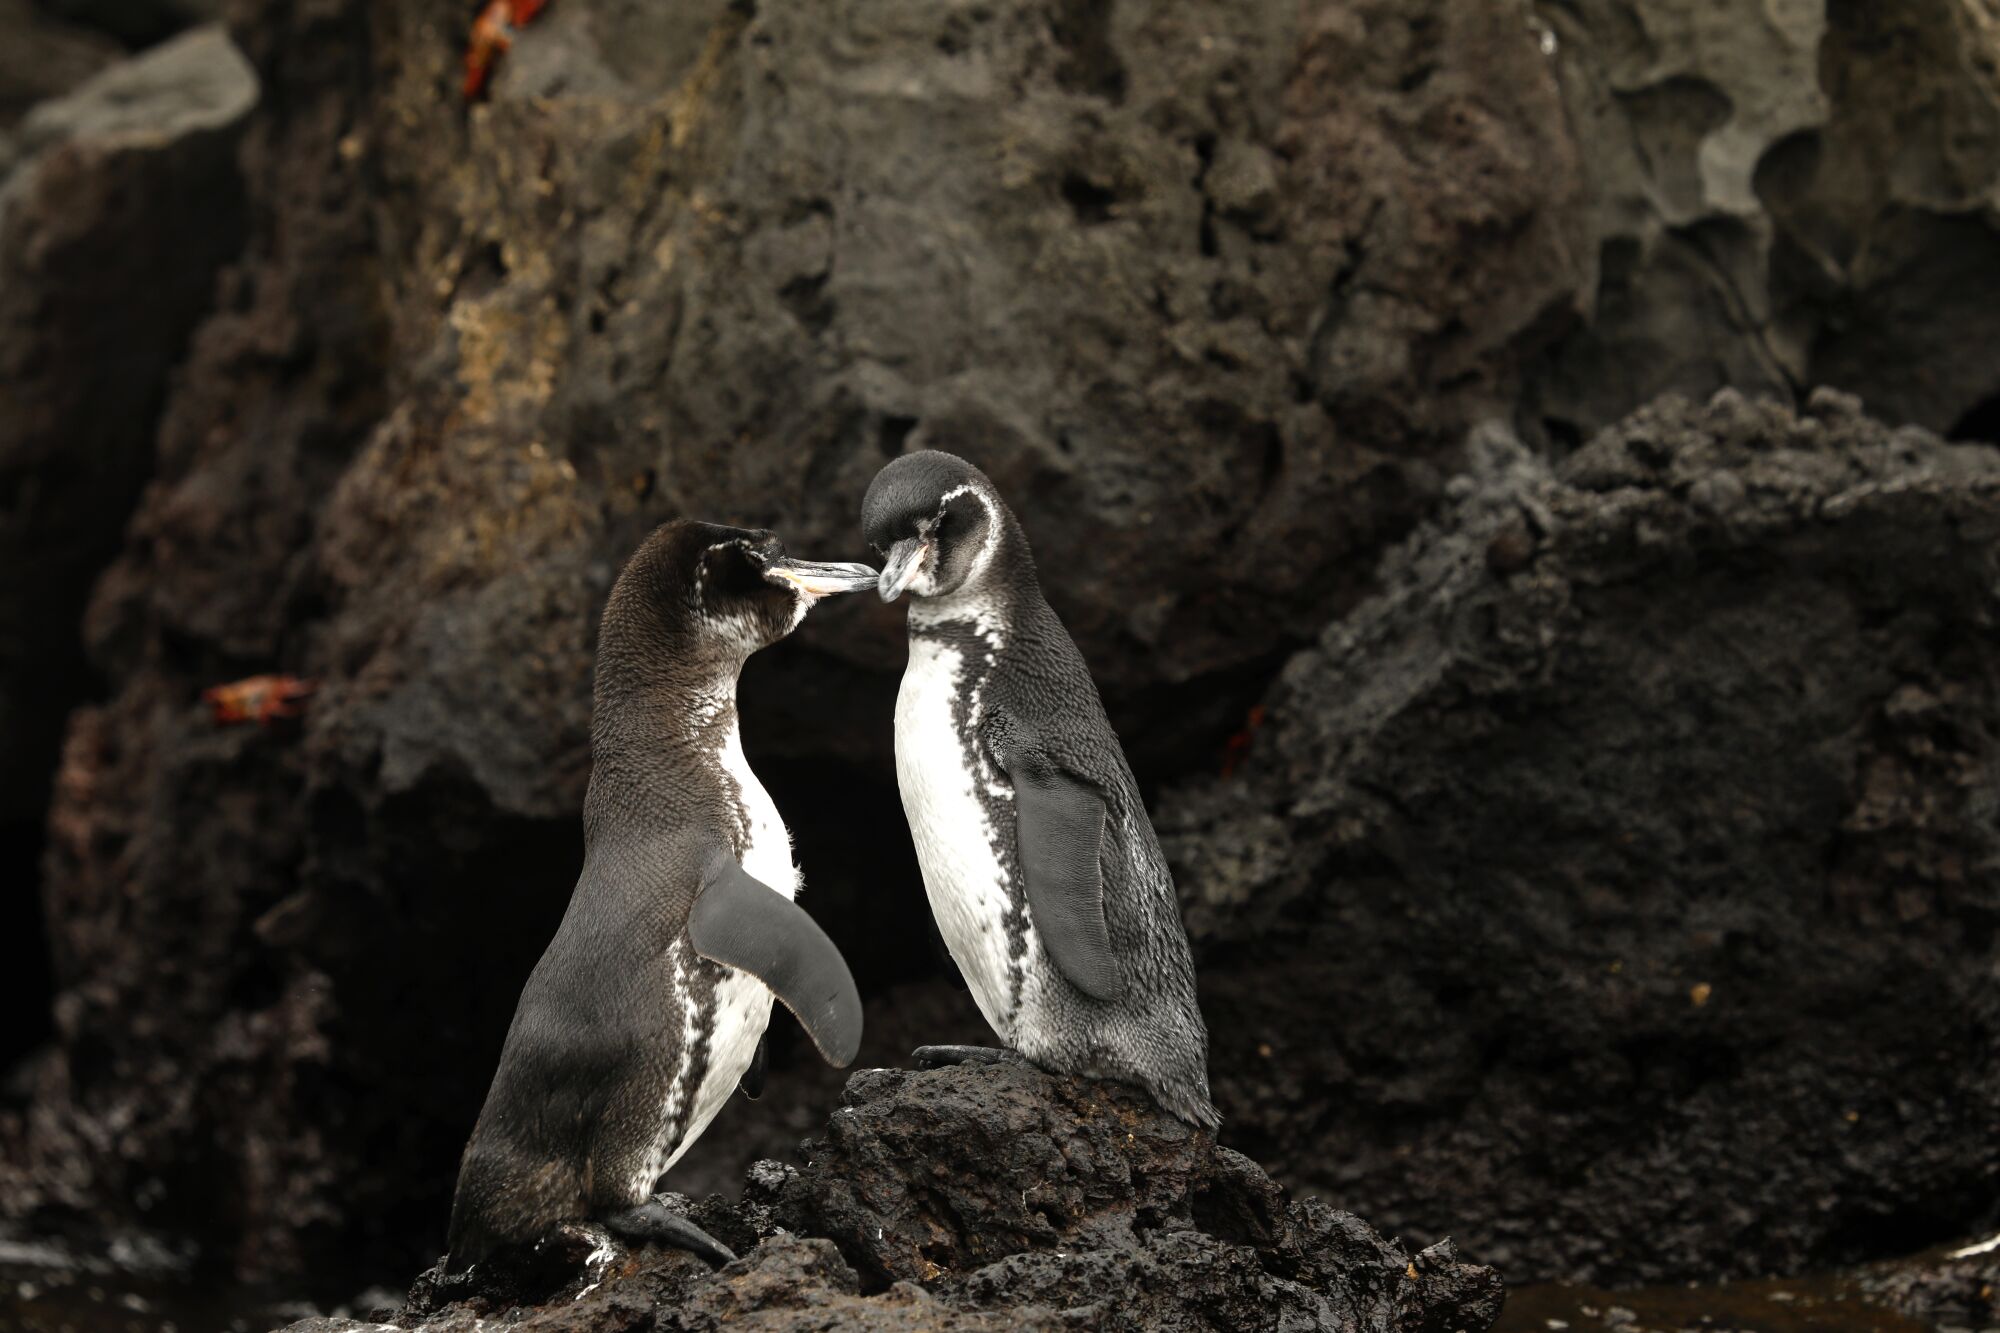 Two black and white Galapagos penguins rub beaks on a rocky outcrop